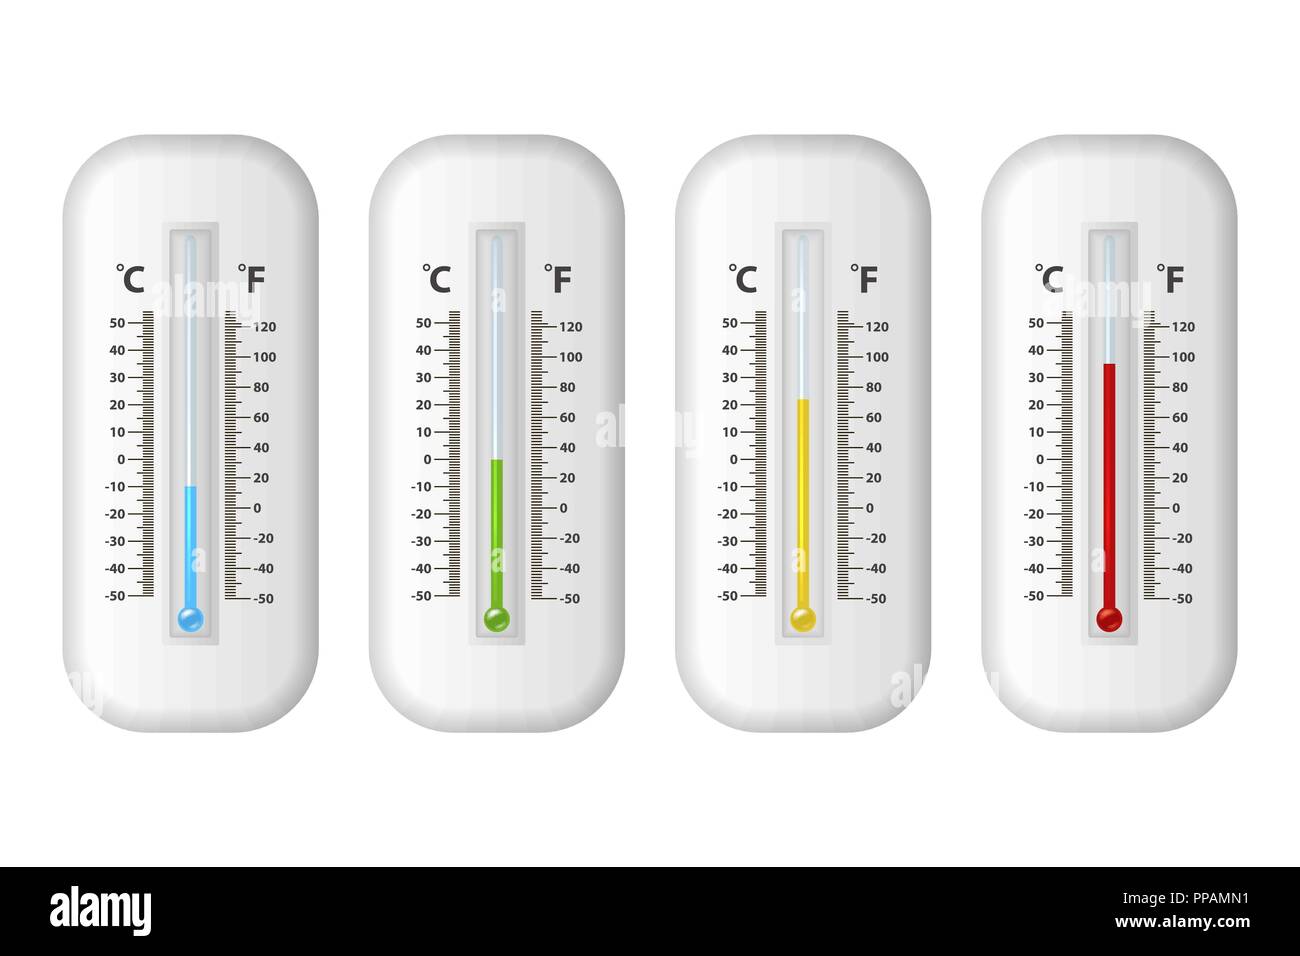 https://c8.alamy.com/comp/PPAMN1/vector-realistic-3d-celsius-and-fahrenheit-meteorology-weather-thermometer-icon-set-closeup-isolated-on-white-background-clip-art-design-template-for-graphics-thermometers-with-different-levels-PPAMN1.jpg